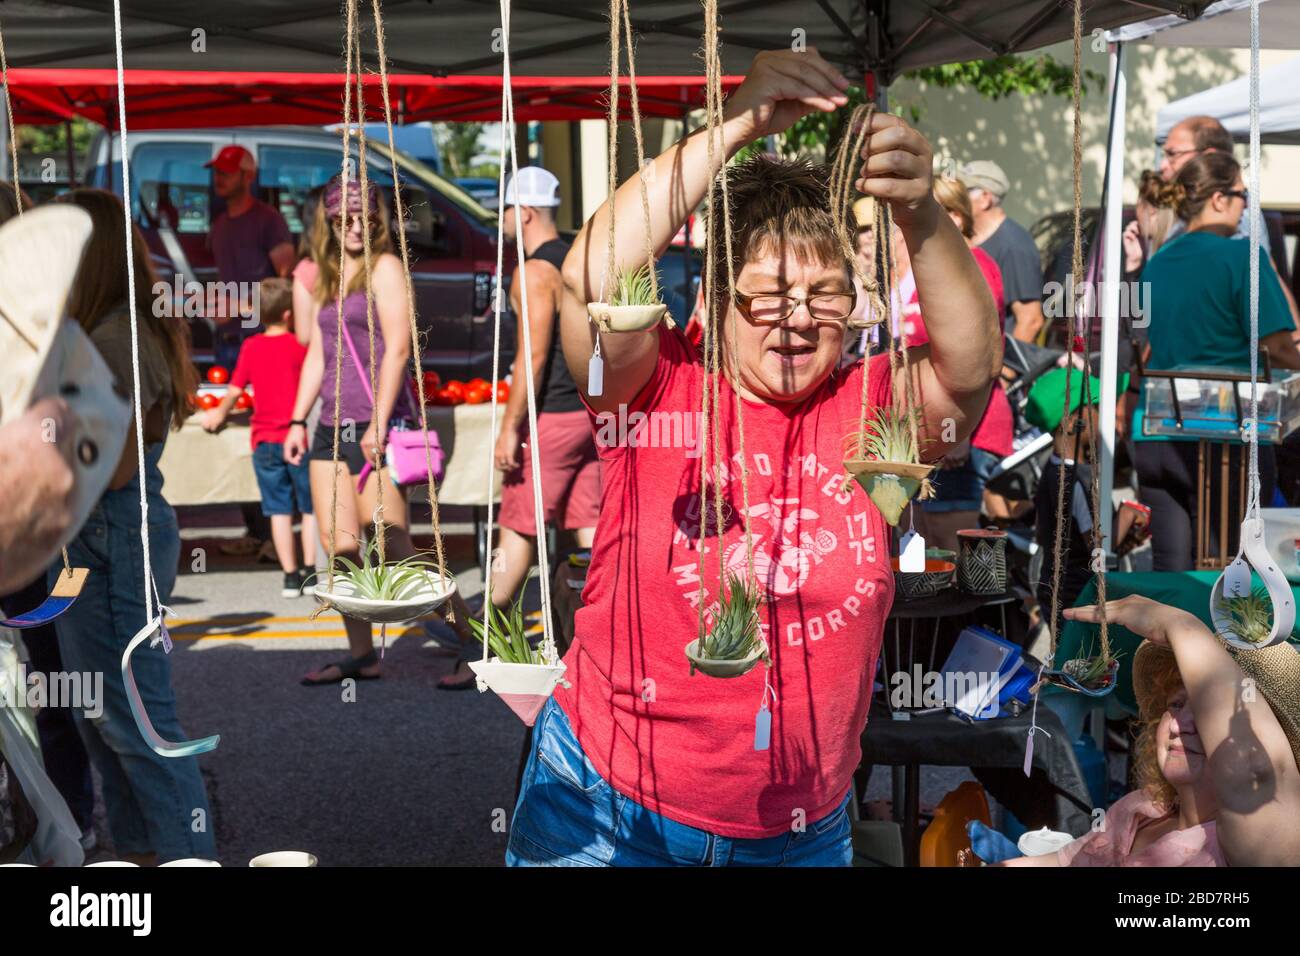 A vendor in a red shirt at Fort Wayne's Farmers Market displays her air plants in downtown Fort Wayne, Indiana, USA. Stock Photo